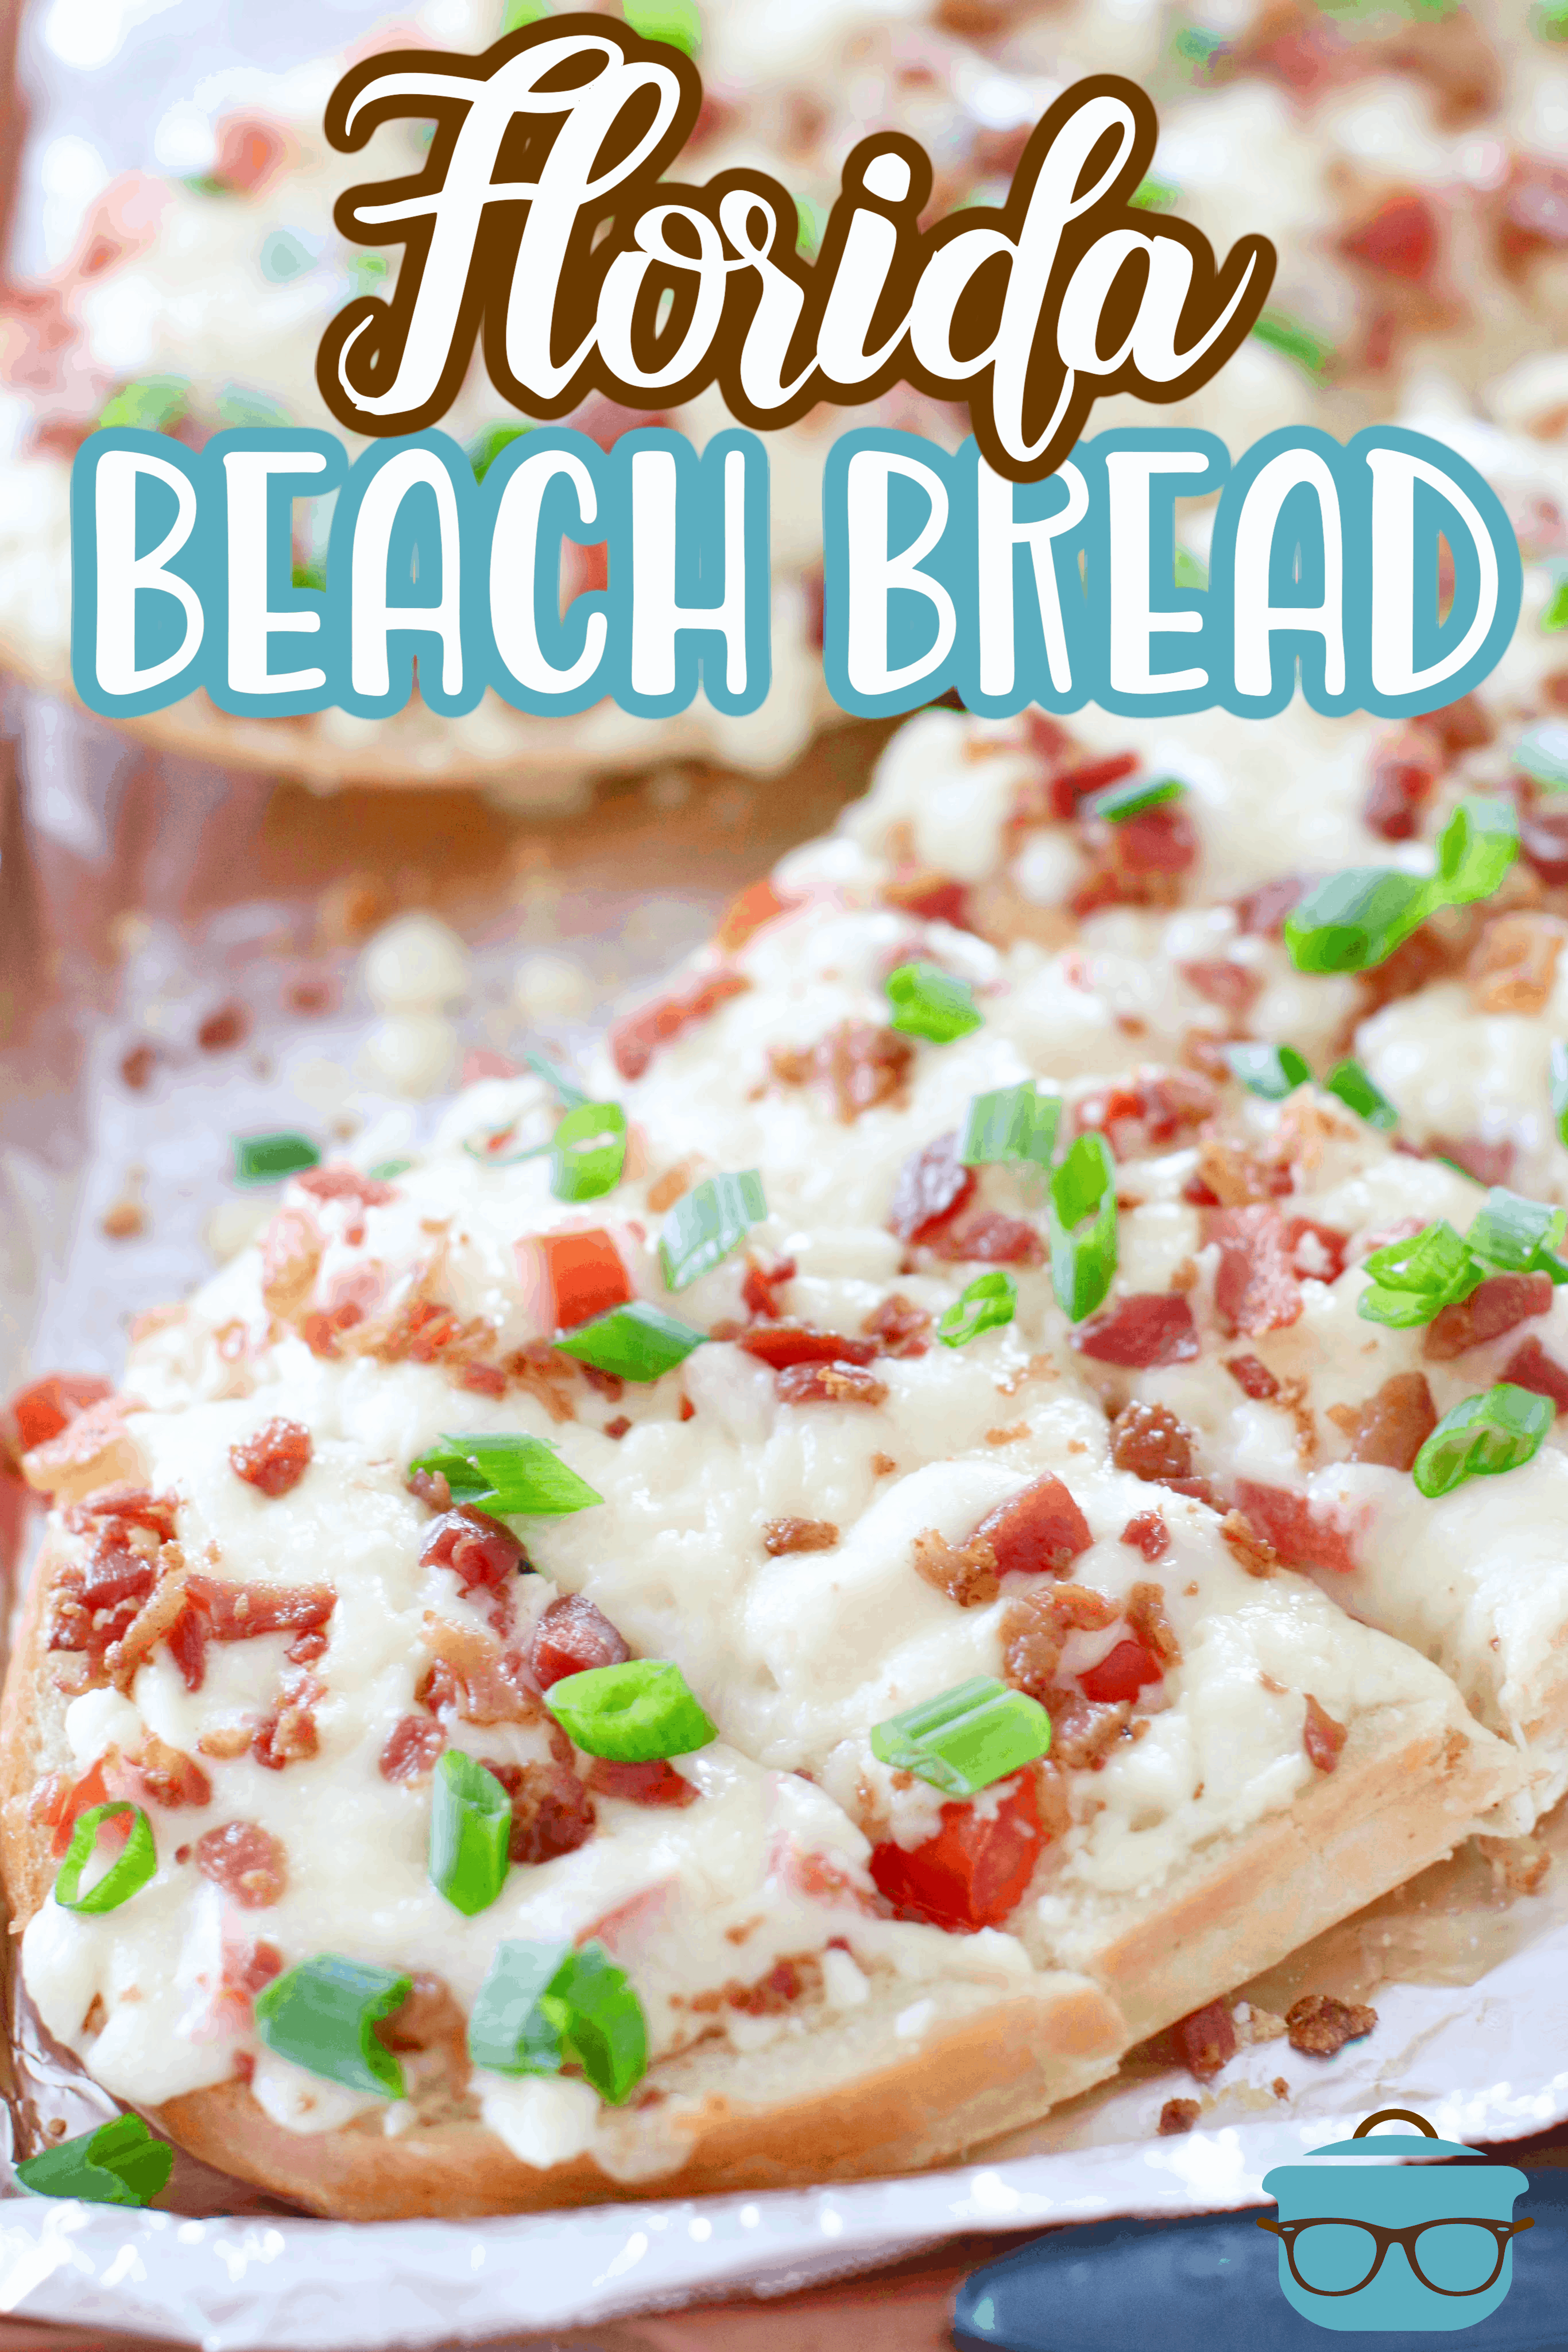 Florida Beach Bread recipe from The Country Cook